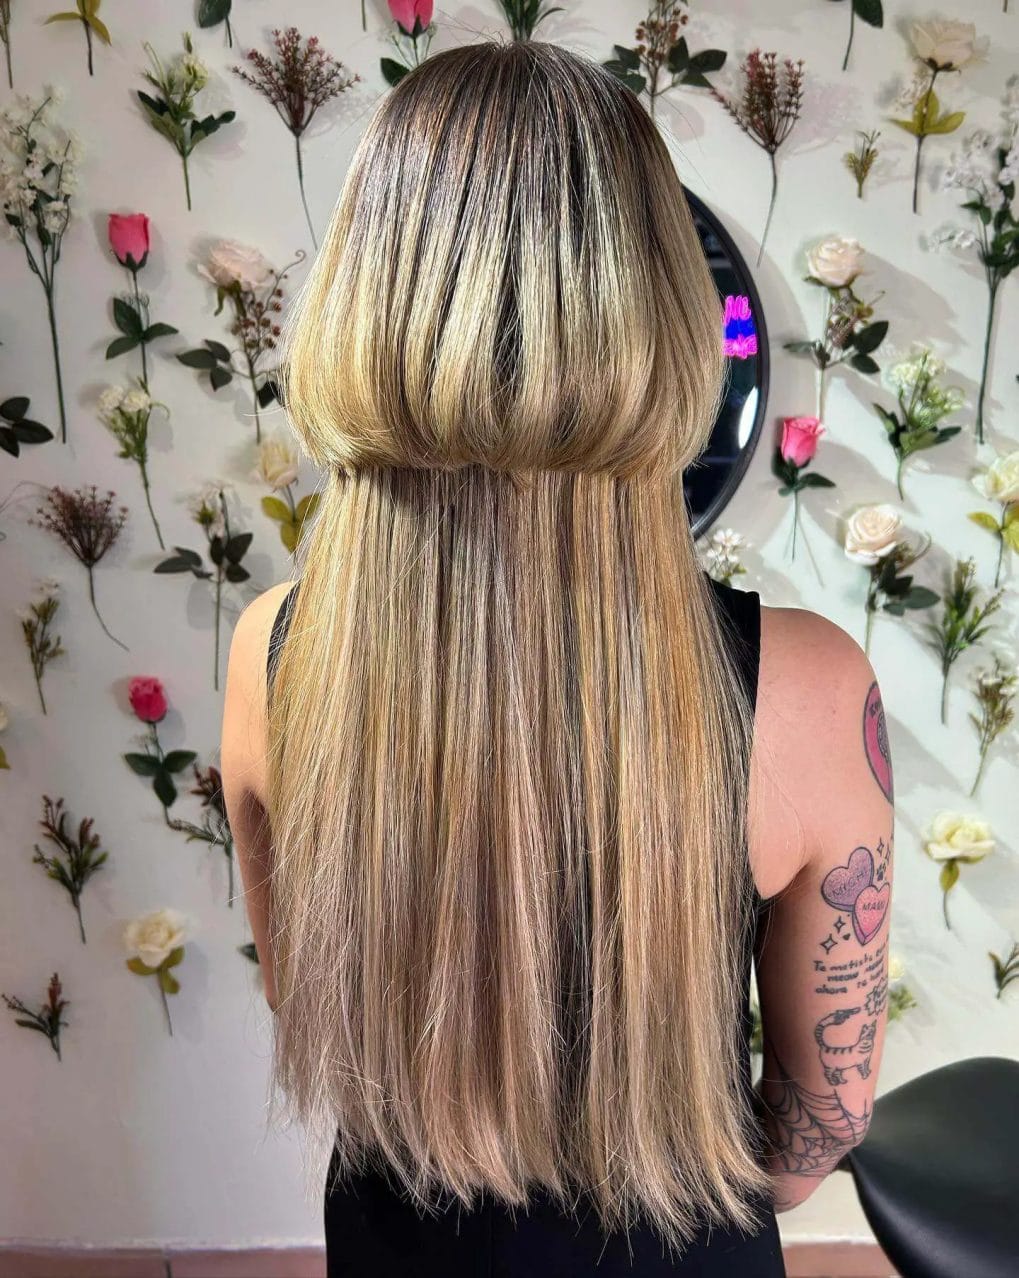 Sleek and softly layered jellyfish haircut with a sophisticated blend of blonde and brunette hues.